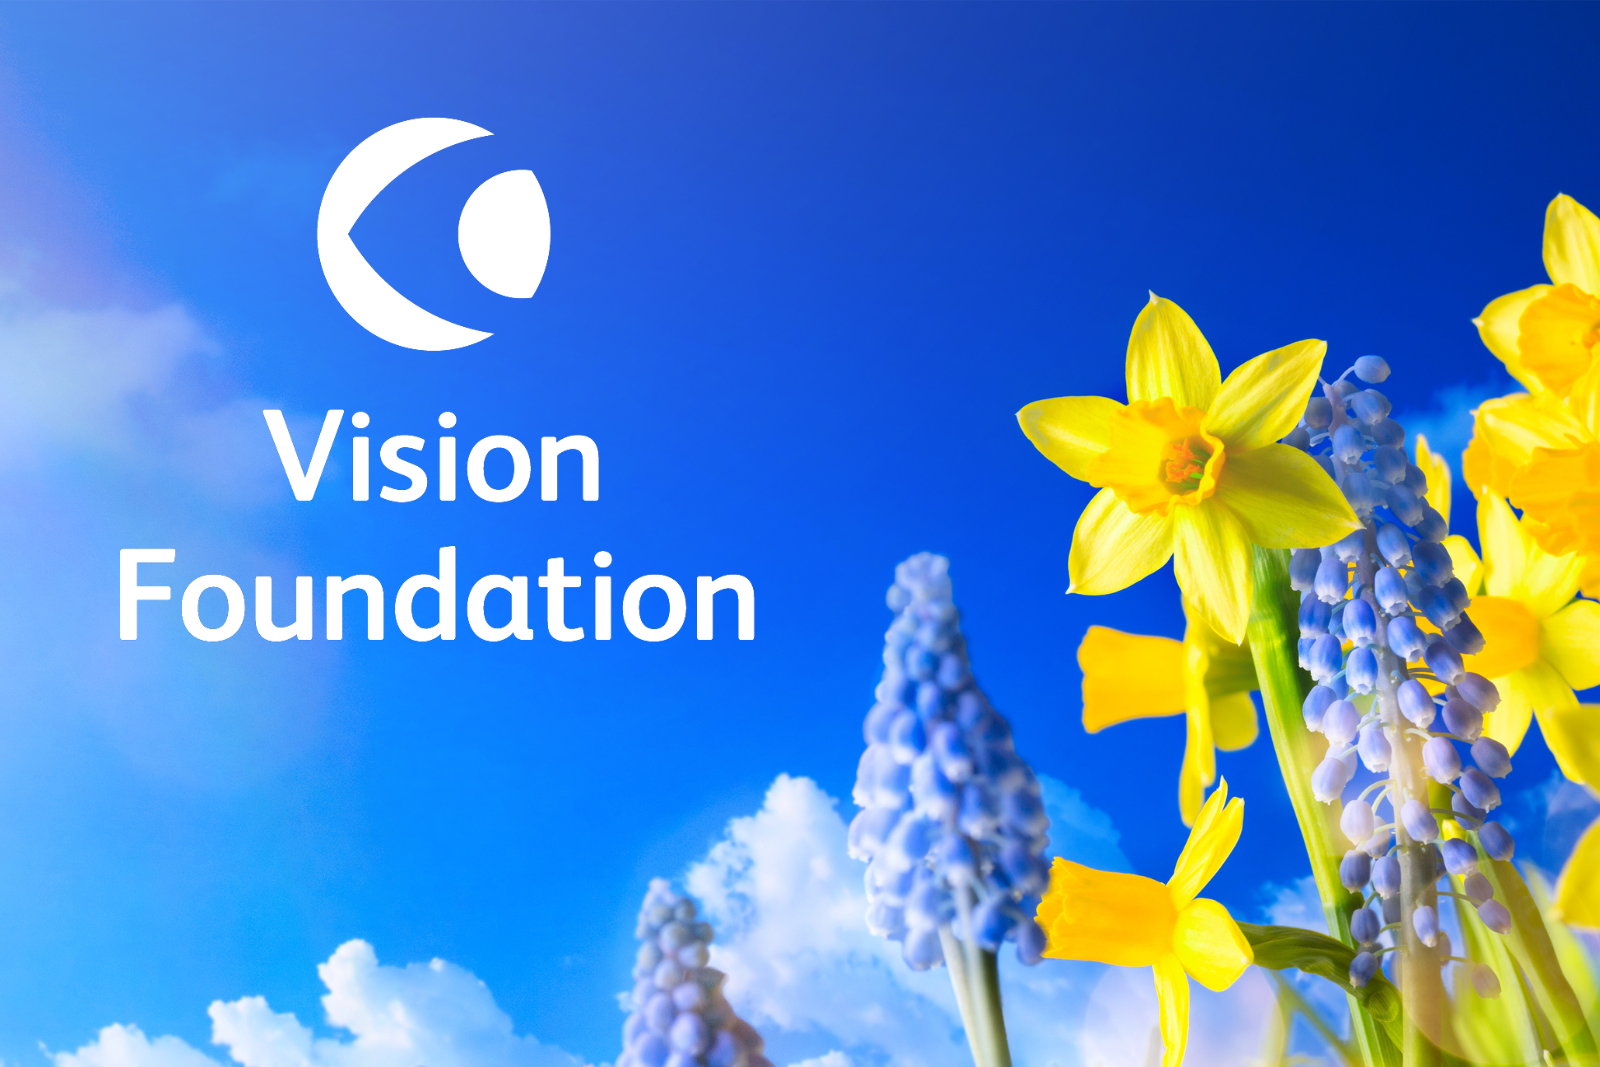 Daffodils and bluebells against a blue sky, with the VF logo in the sky.